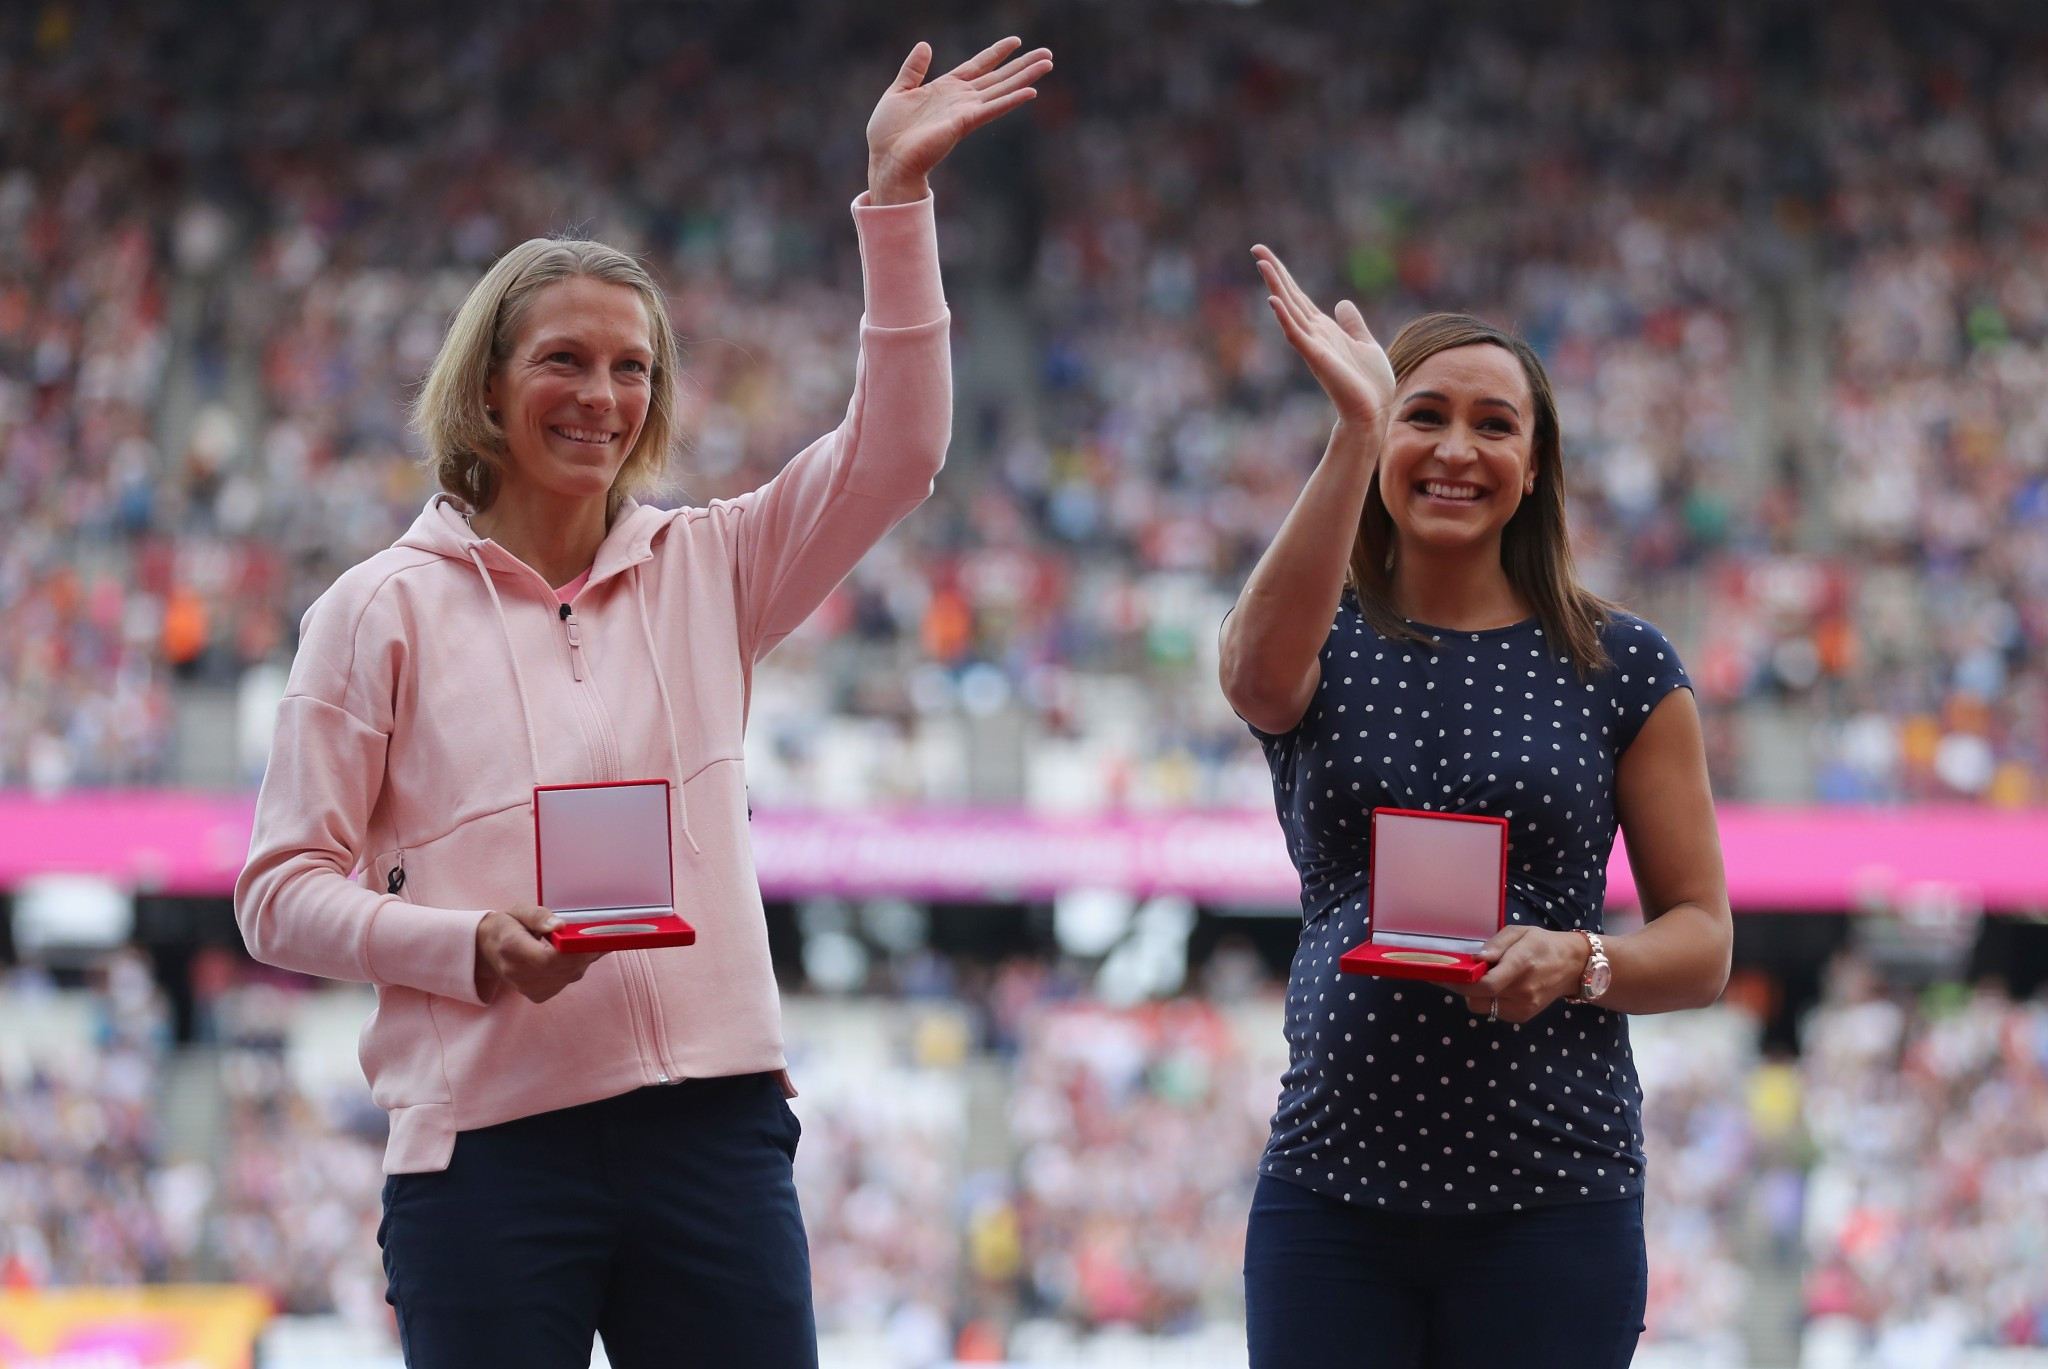 Britain's Jessica Ennis-Hill and Germany's Jennifer Oeser were retrospectively awarded gold and silver heptathlon medals from the 2011 World Championships today ©Getty Images